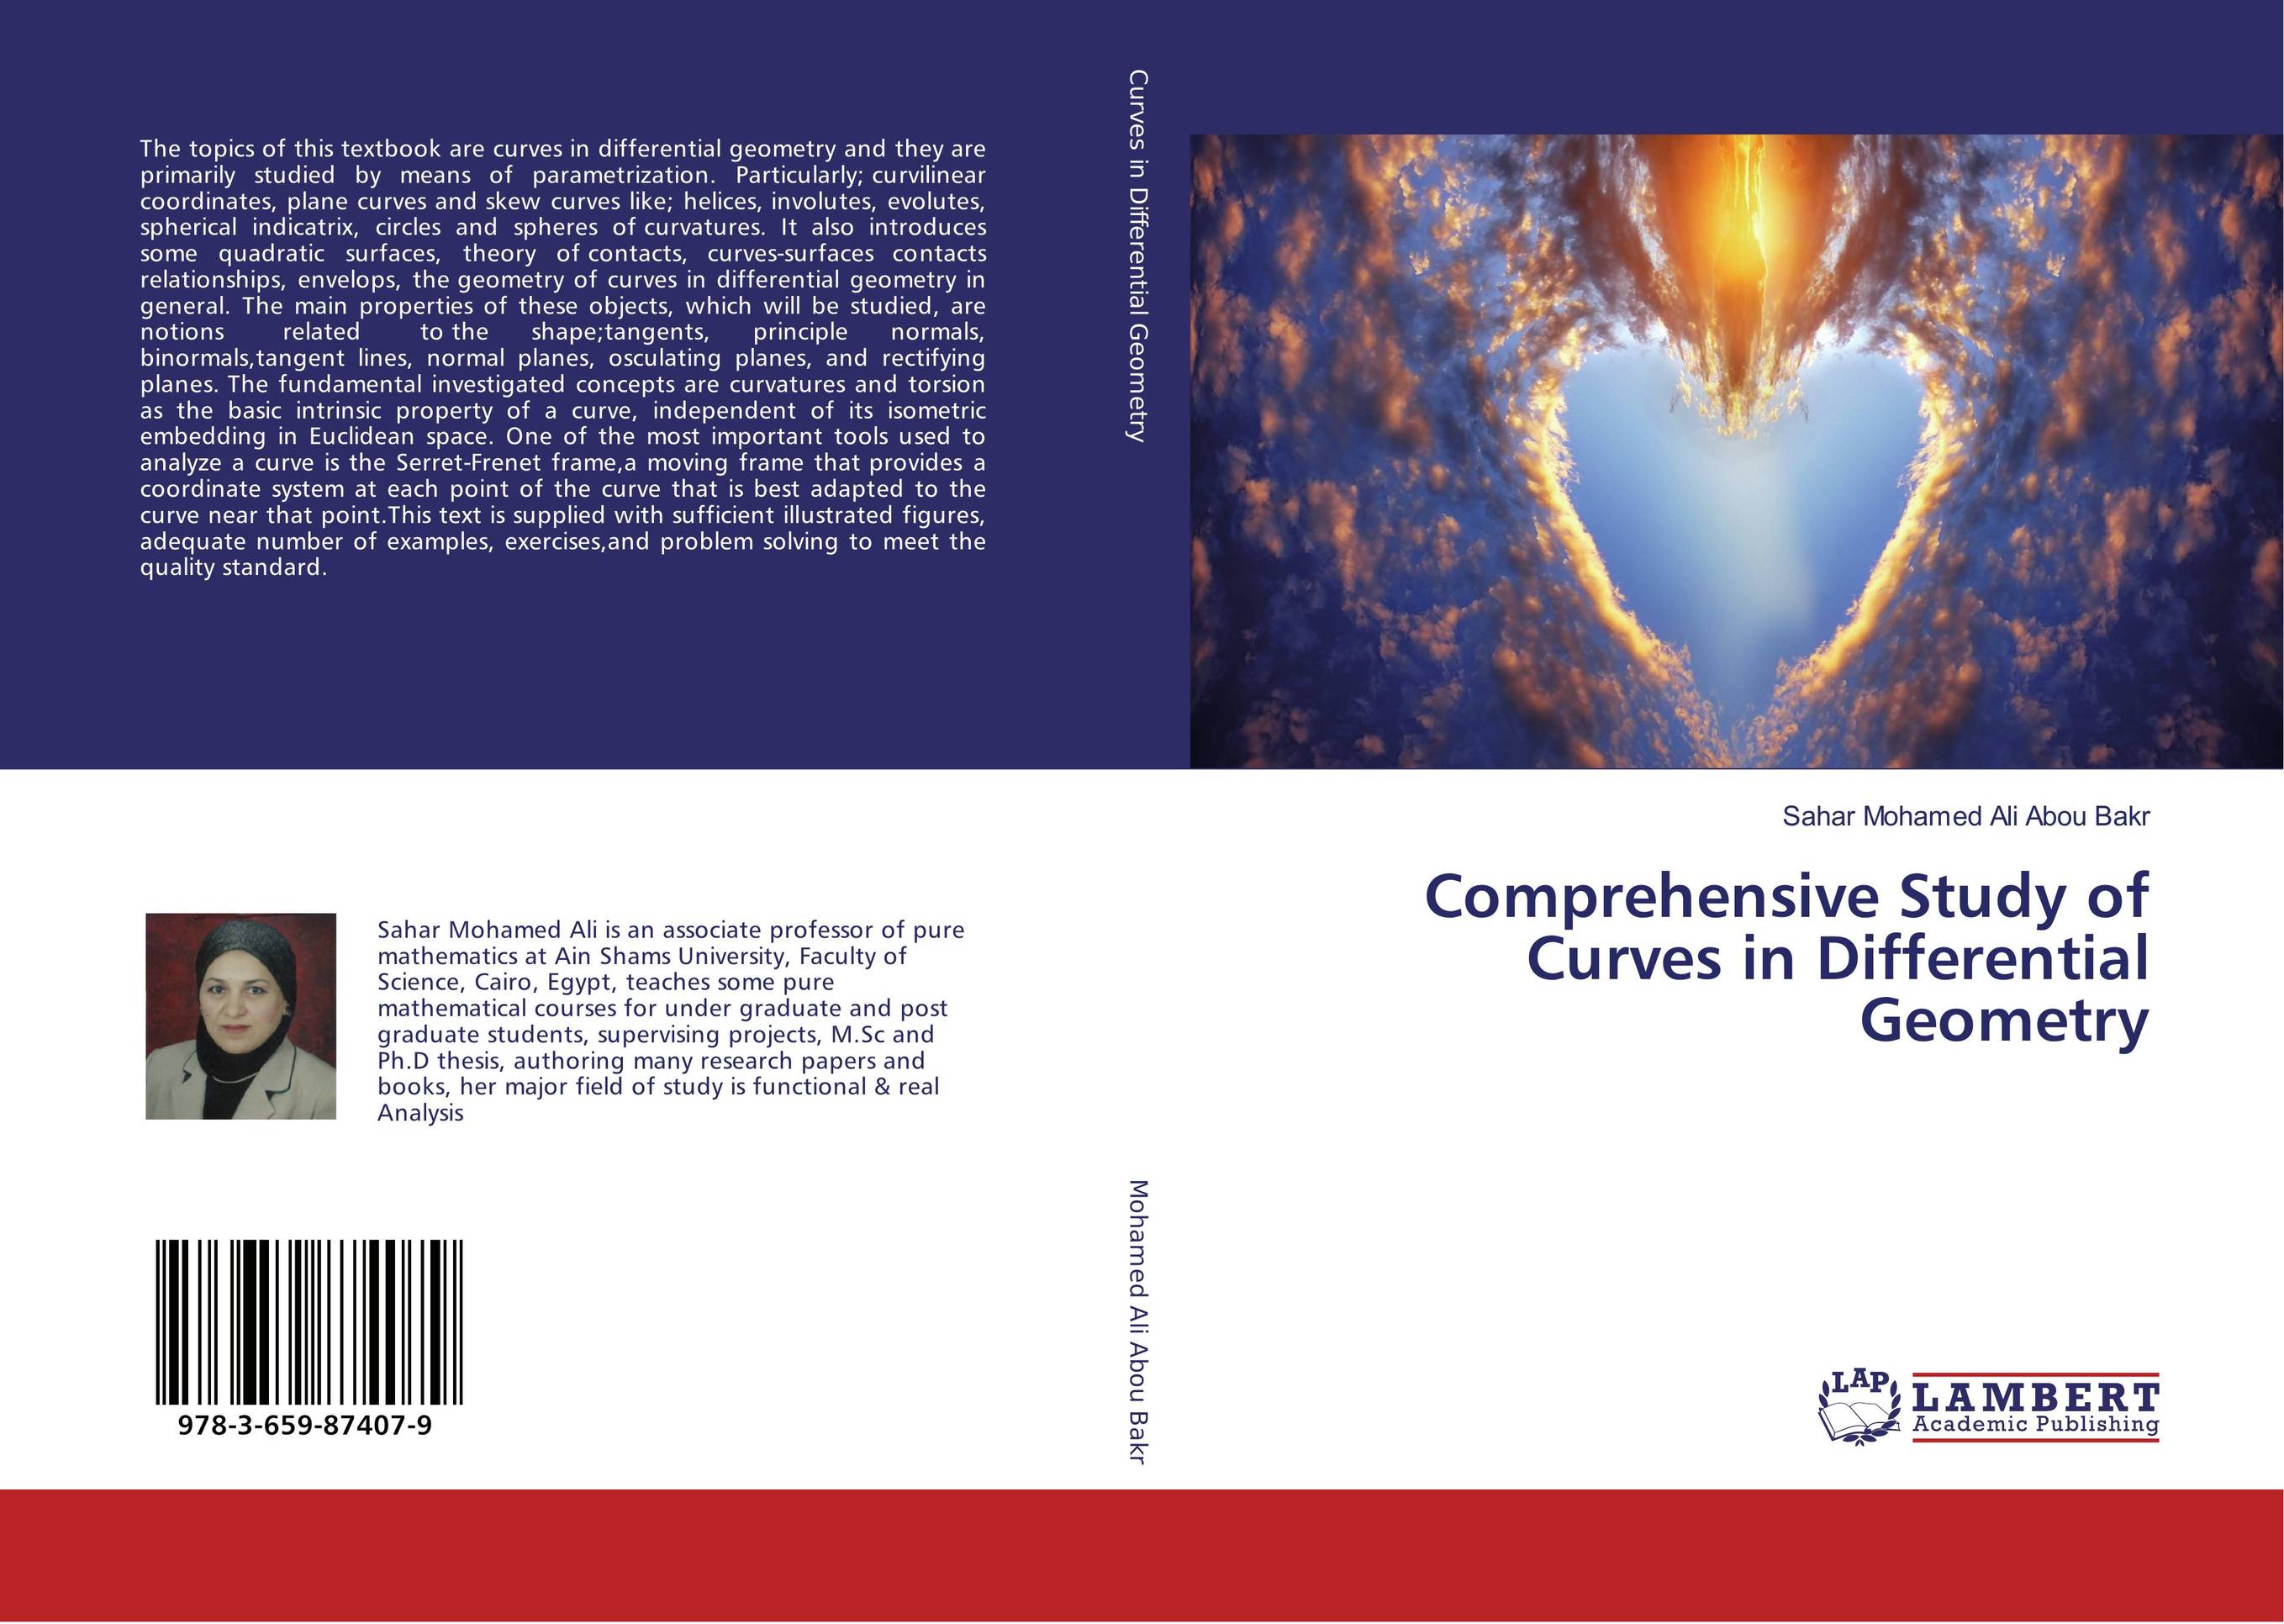 Comprehensive Study of Curves in Differential Geometry